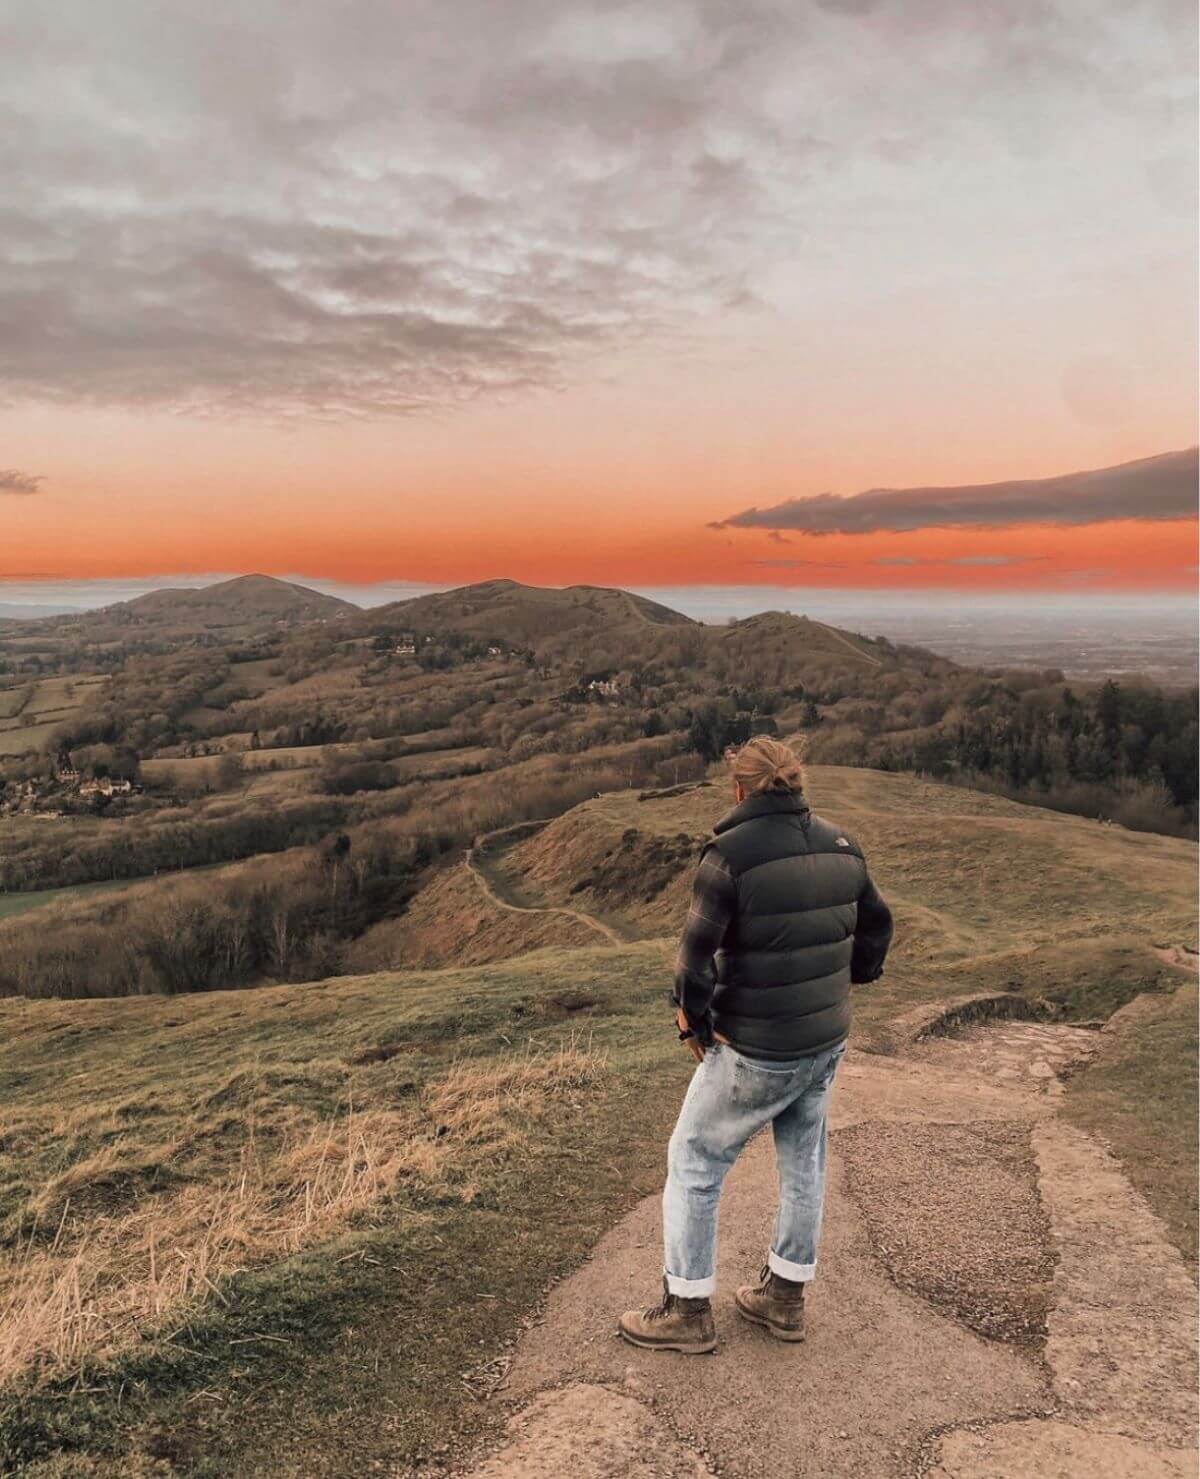 A person watching the orange sunset over the Malvern Hills